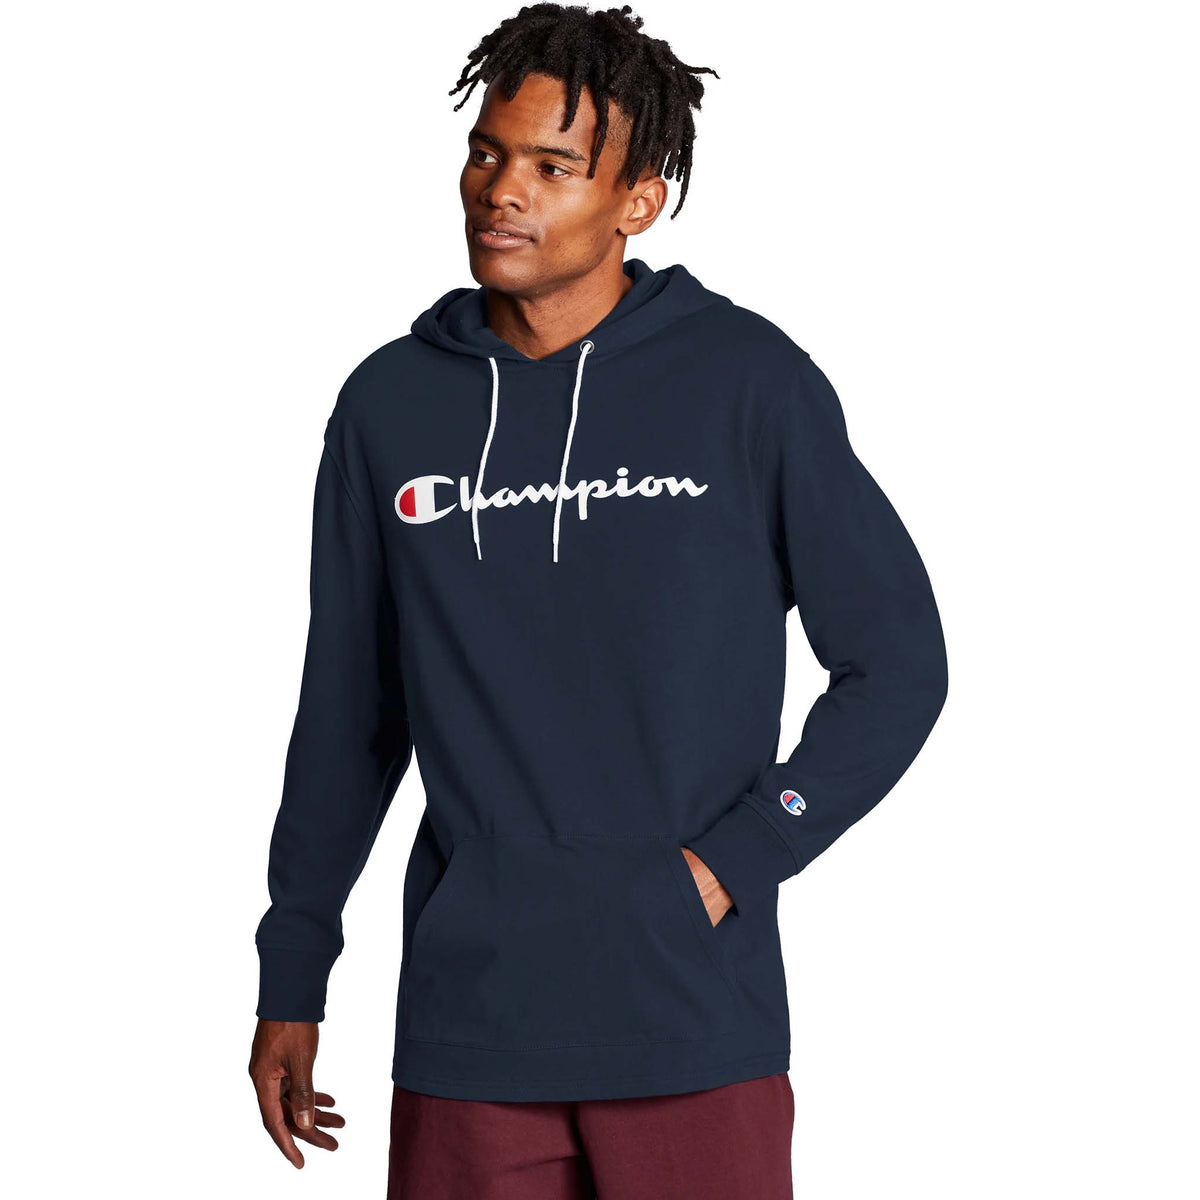 Champion Middleweight Jersey Hoodie navy face